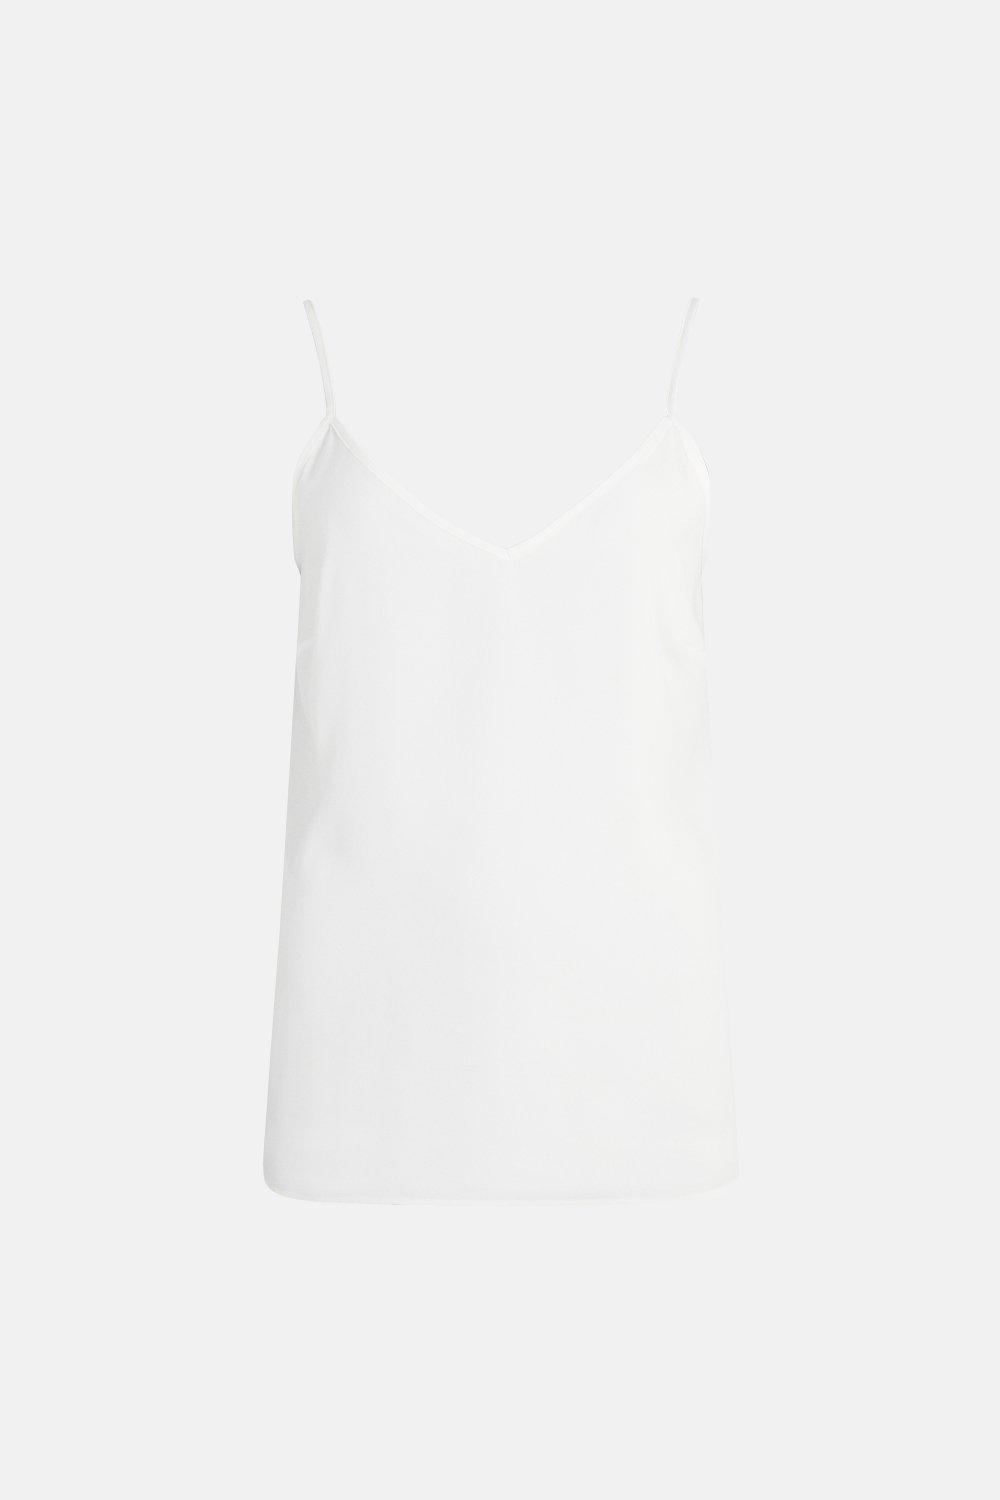 Warehouse high neck cami in white